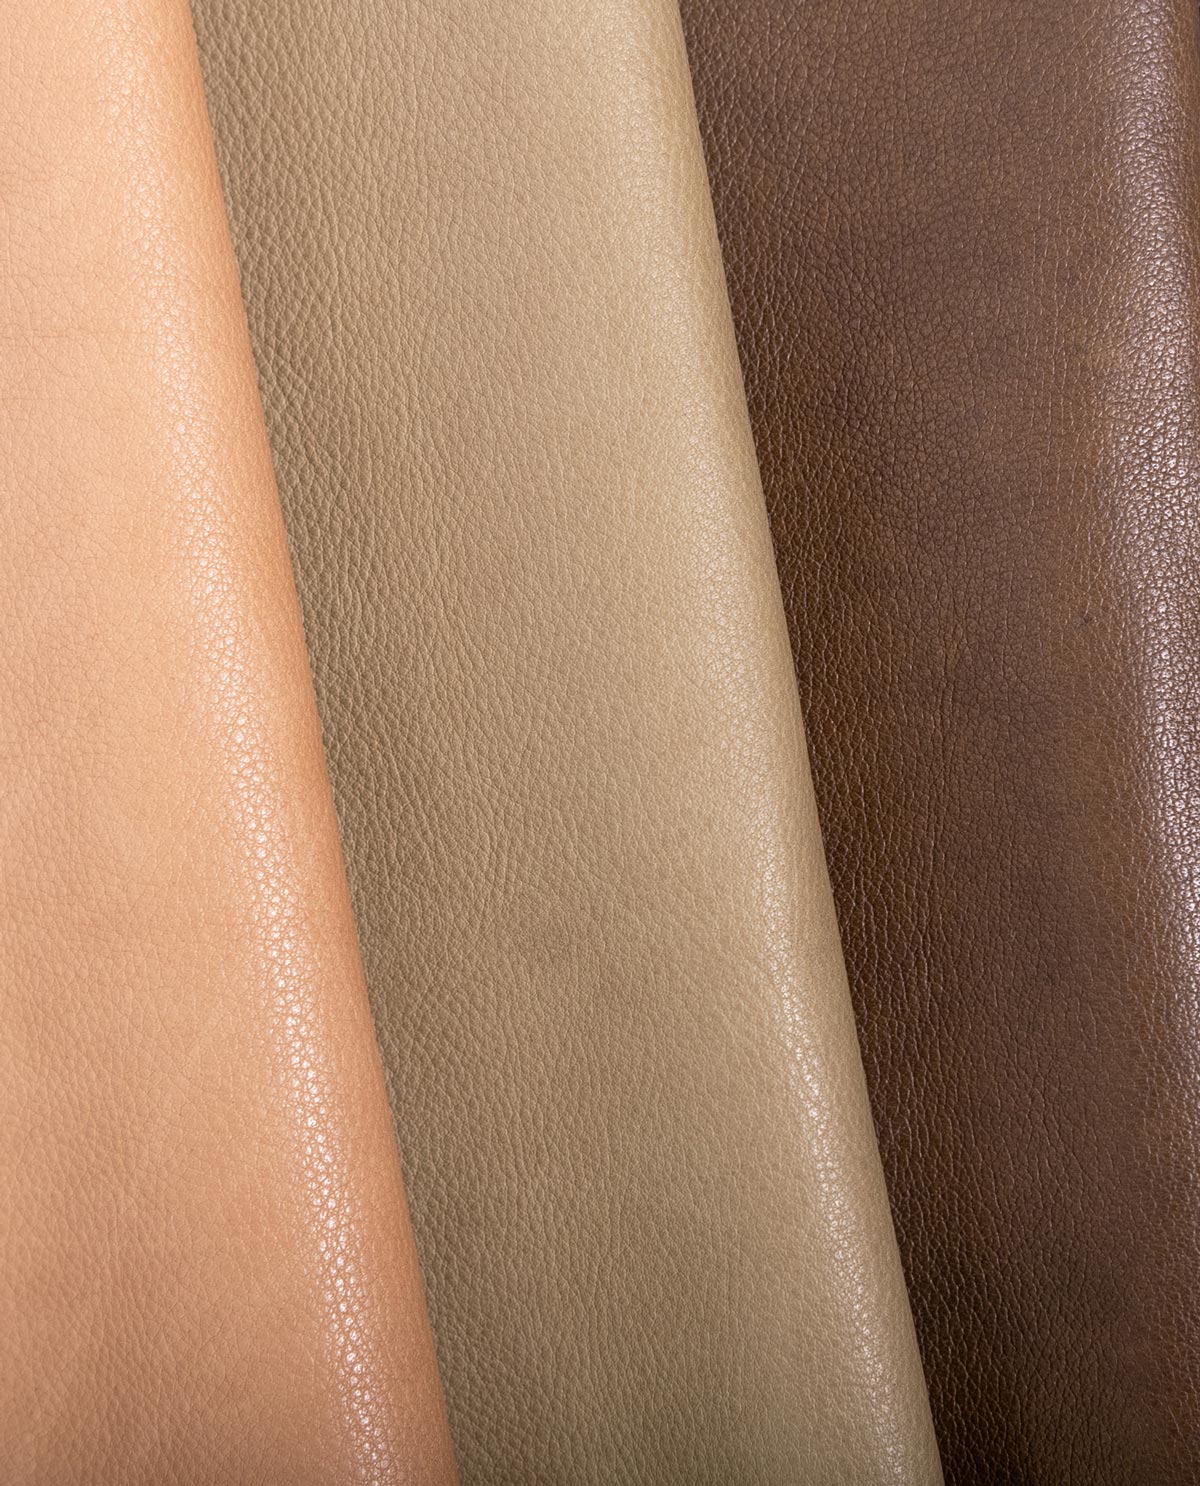 Python Embossed Leather - Jamie Stern Design - Upholstery Leather